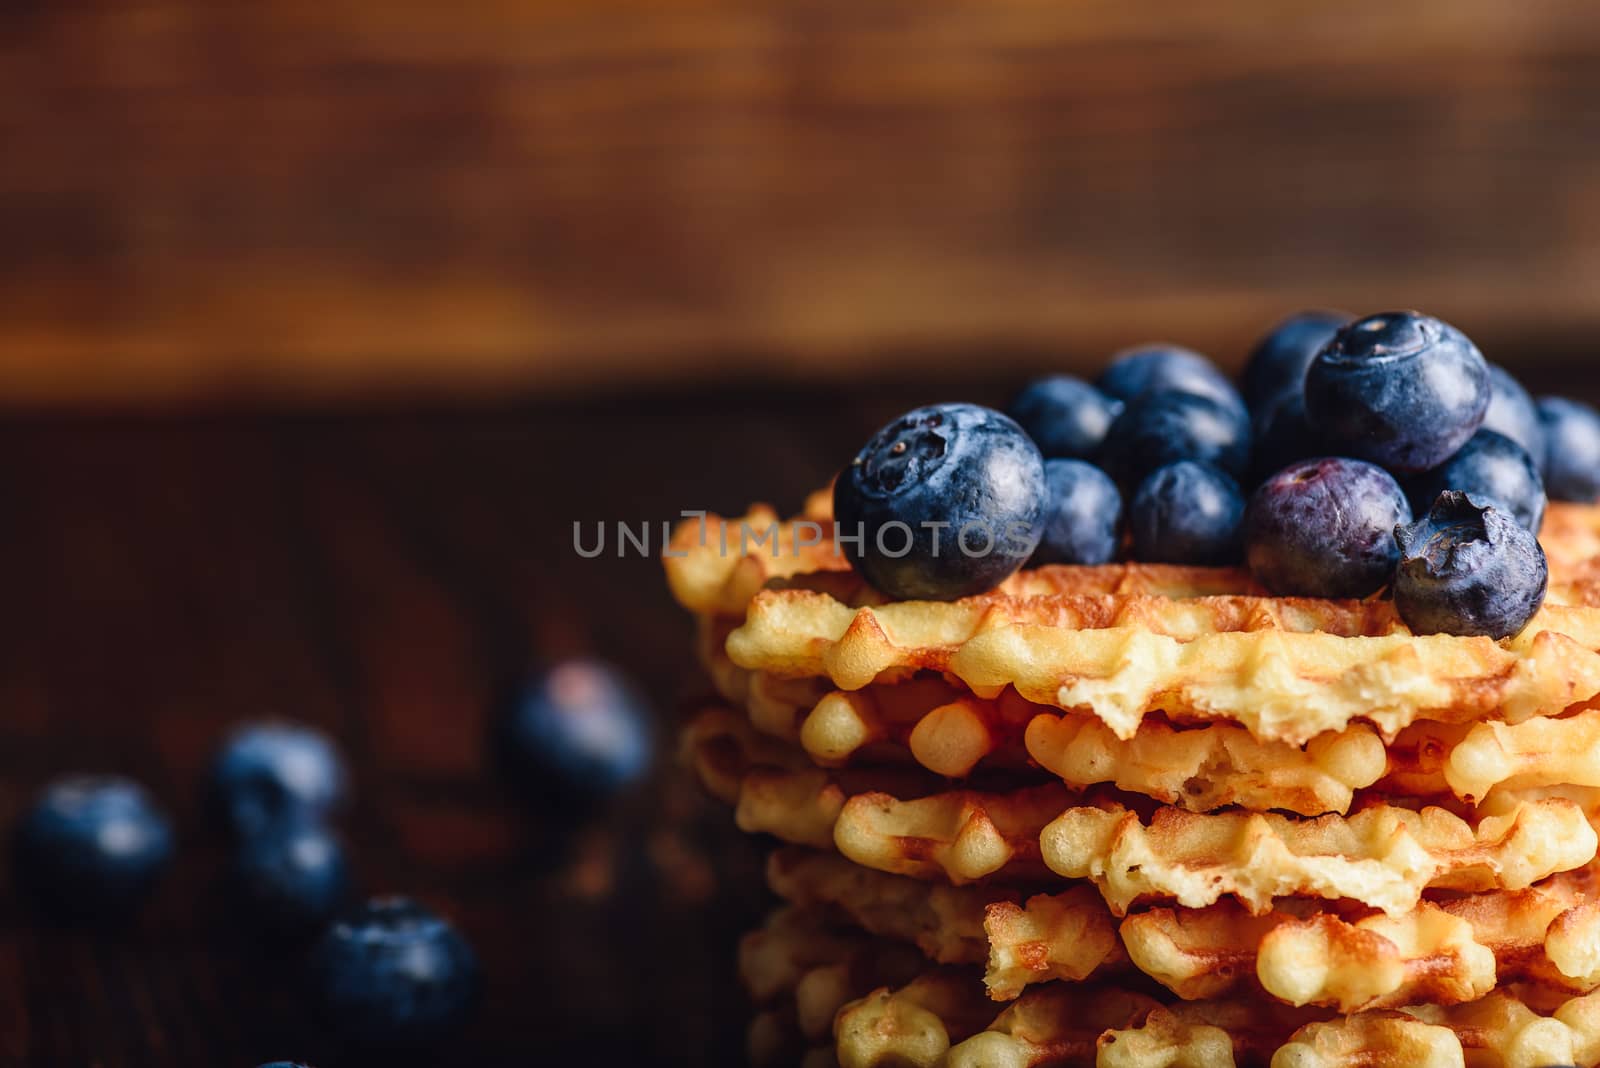 Blueberries on the Top of the Waffles Stack and Other Scattered on Wooden Background. Copy Space on the Left.